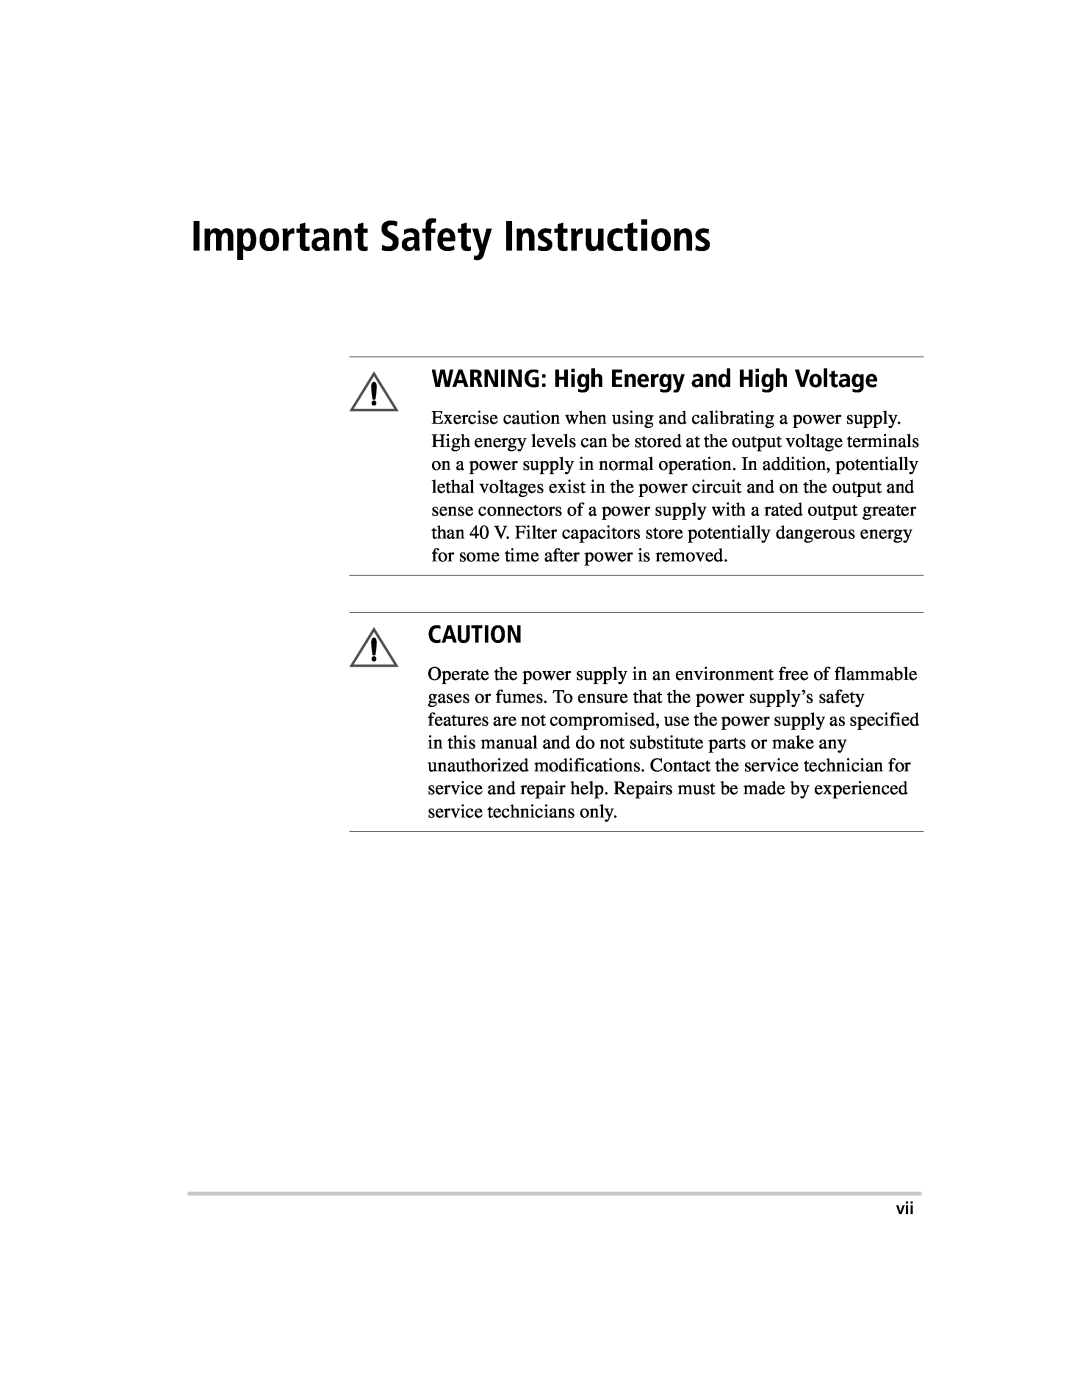 Xantrex Technology ENET-XFR3 manual Important Safety Instructions, WARNING High Energy and High Voltage 